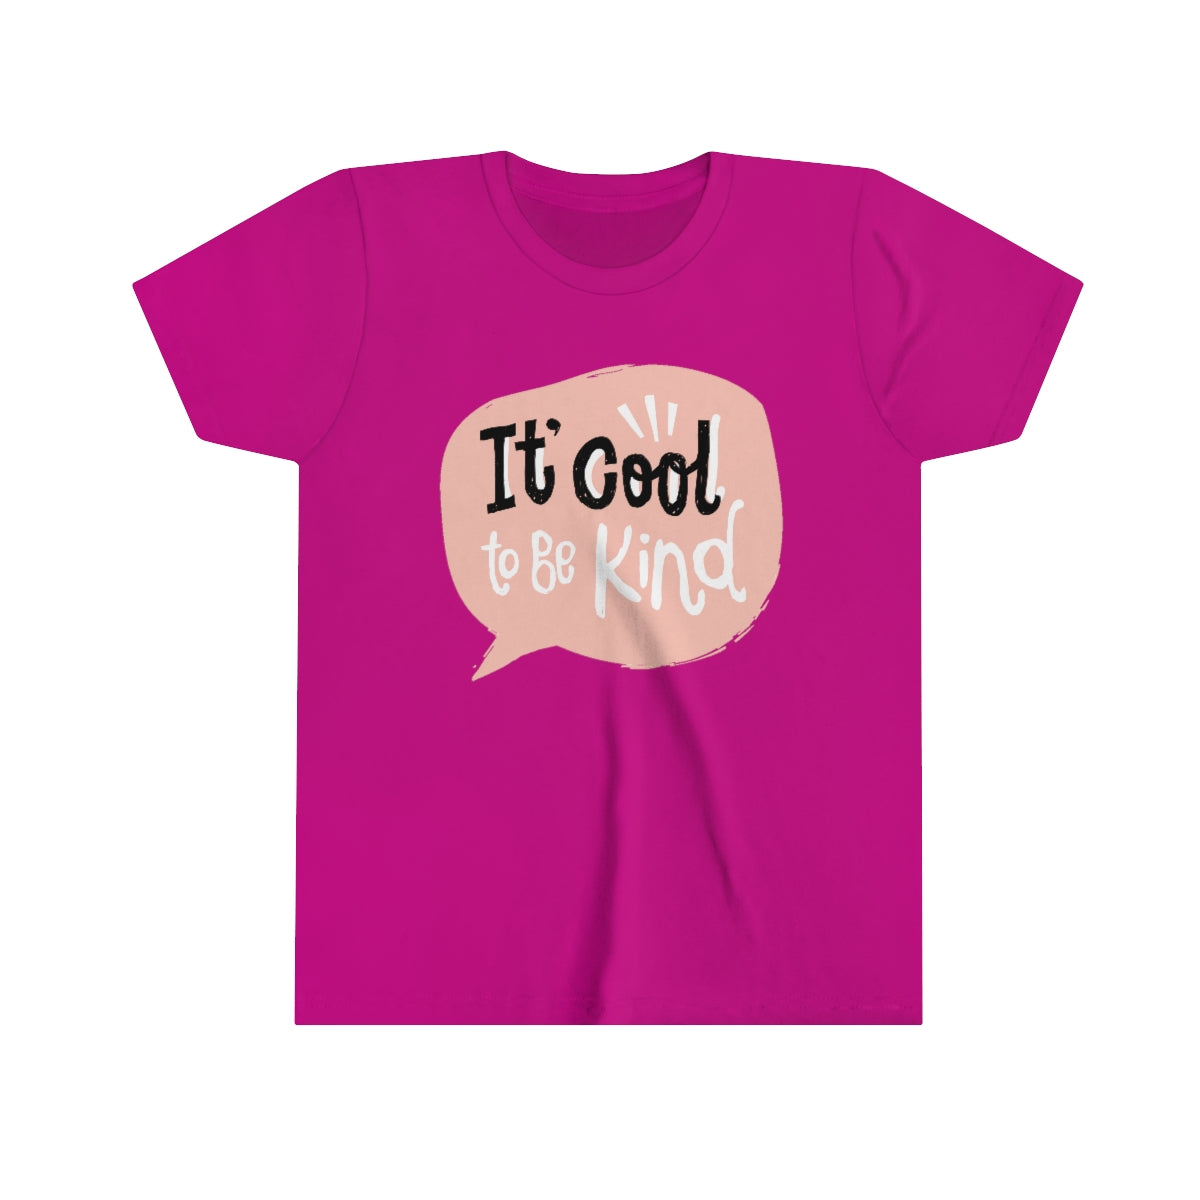 Youth Short Sleeve Tee "Pink shirt DAY It's cool to be kind"